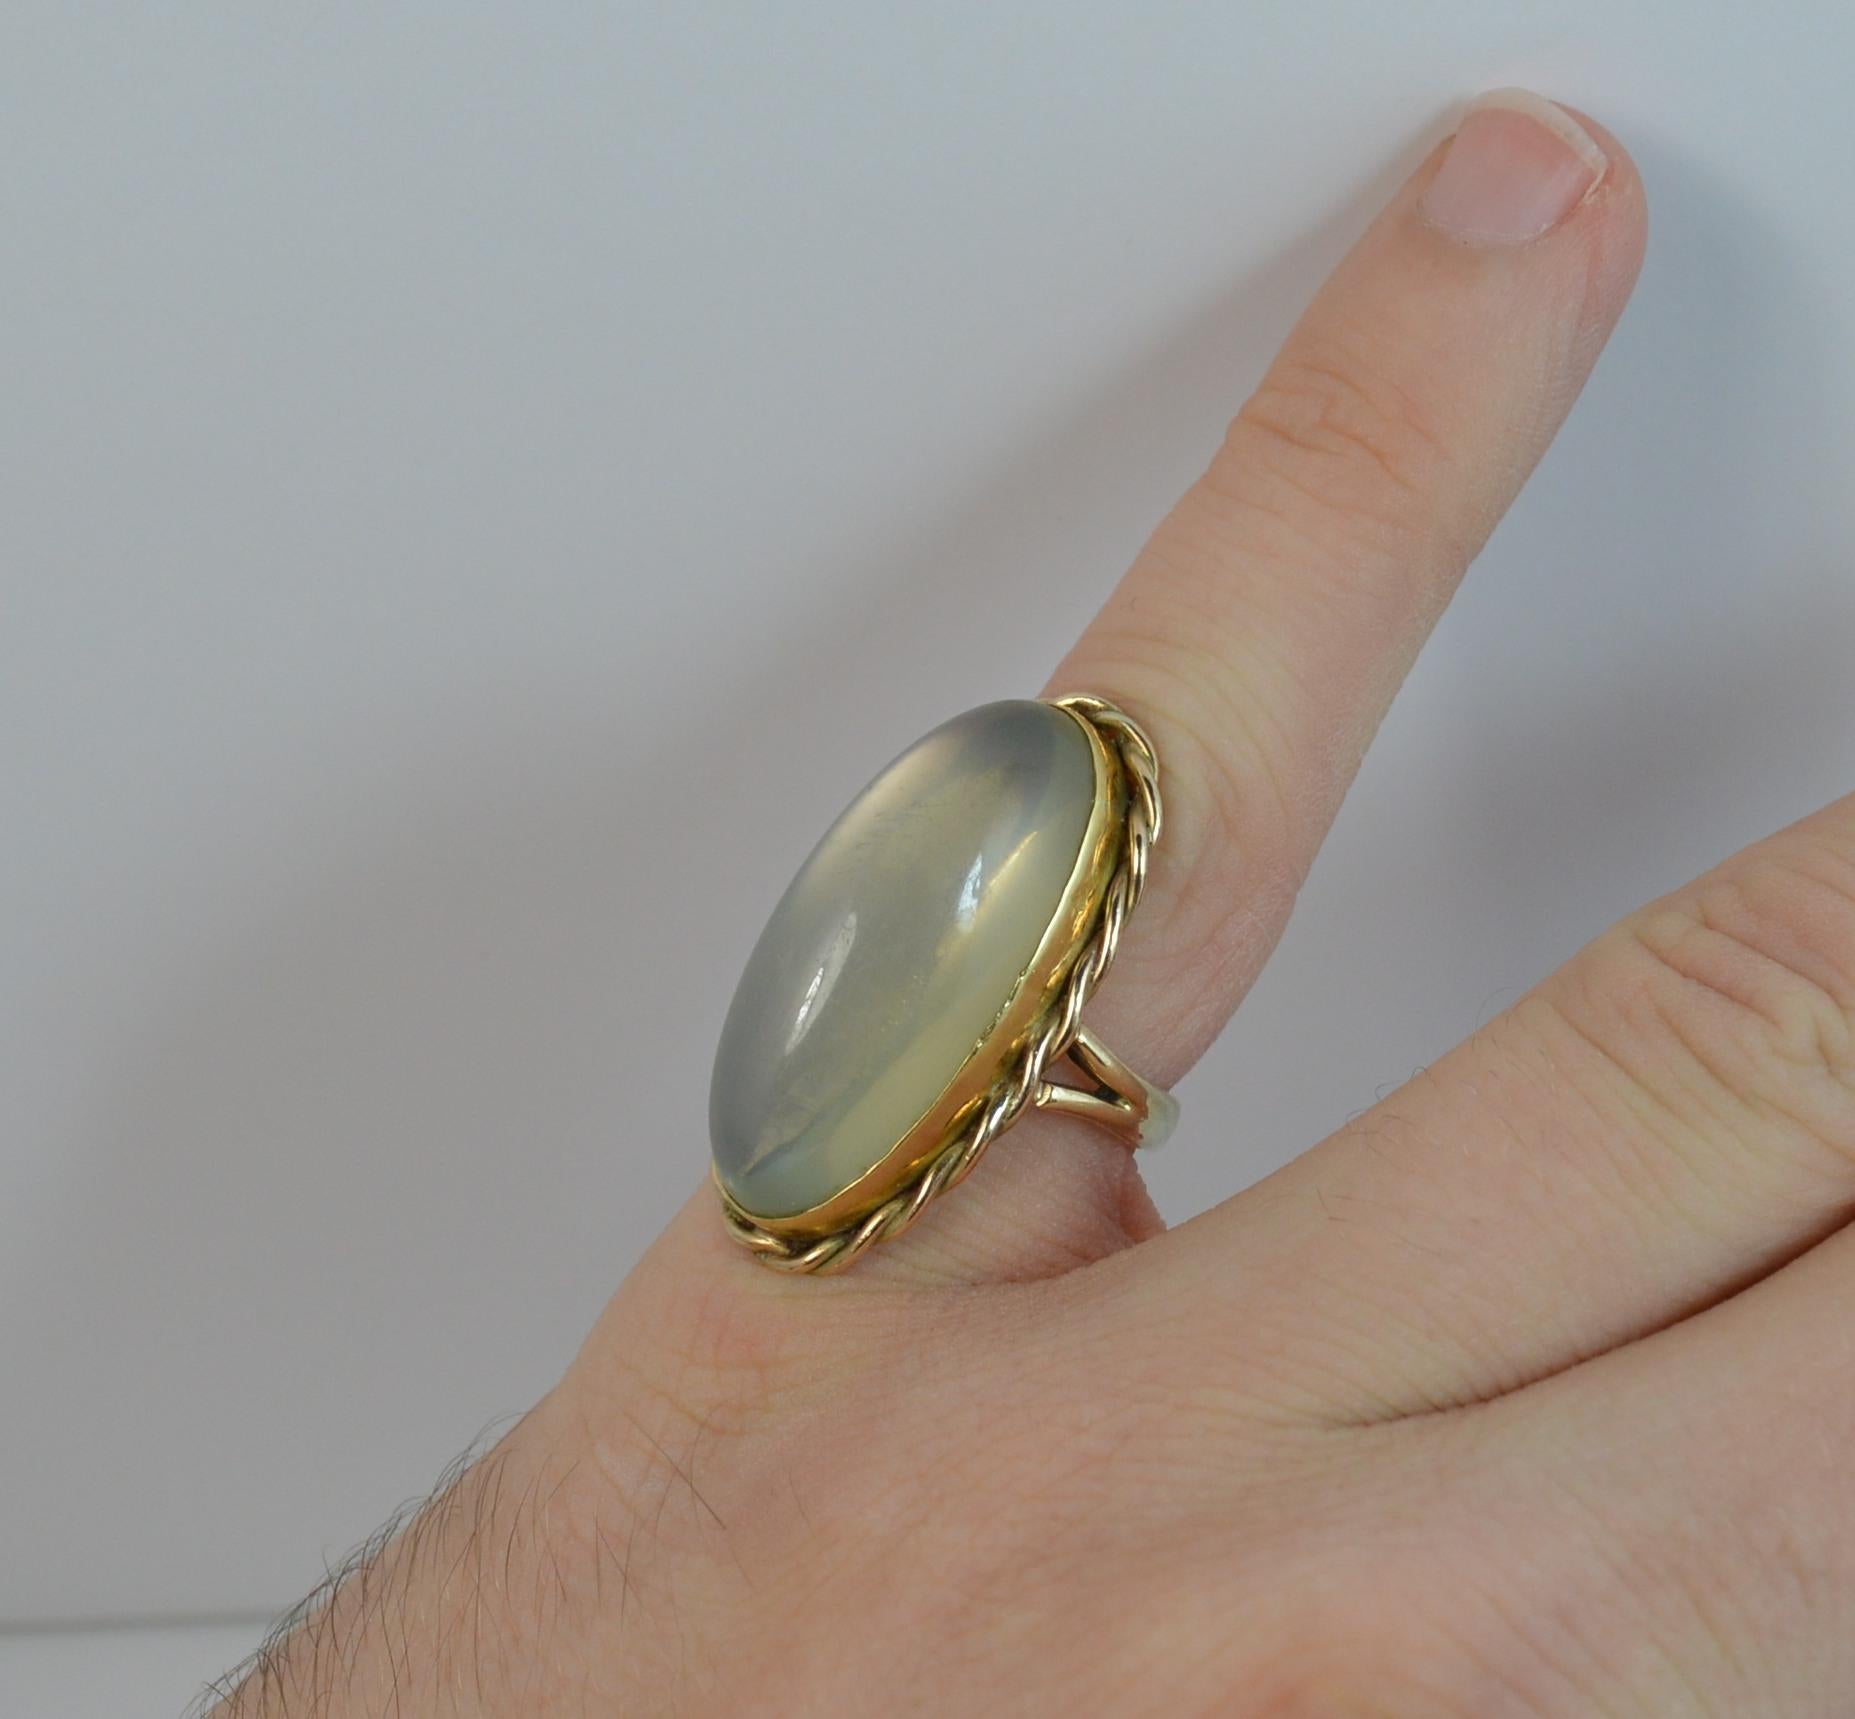 A fine retro solitaire ring. Solid 9 carat yellow gold example.
Size ; i UK, 4 US
Set with a single elongated oval moonstone agate cabochon, 13mm x 27mm approx with a gold rope twist surround to the bezel setting.



Condition ; Very good. Clean